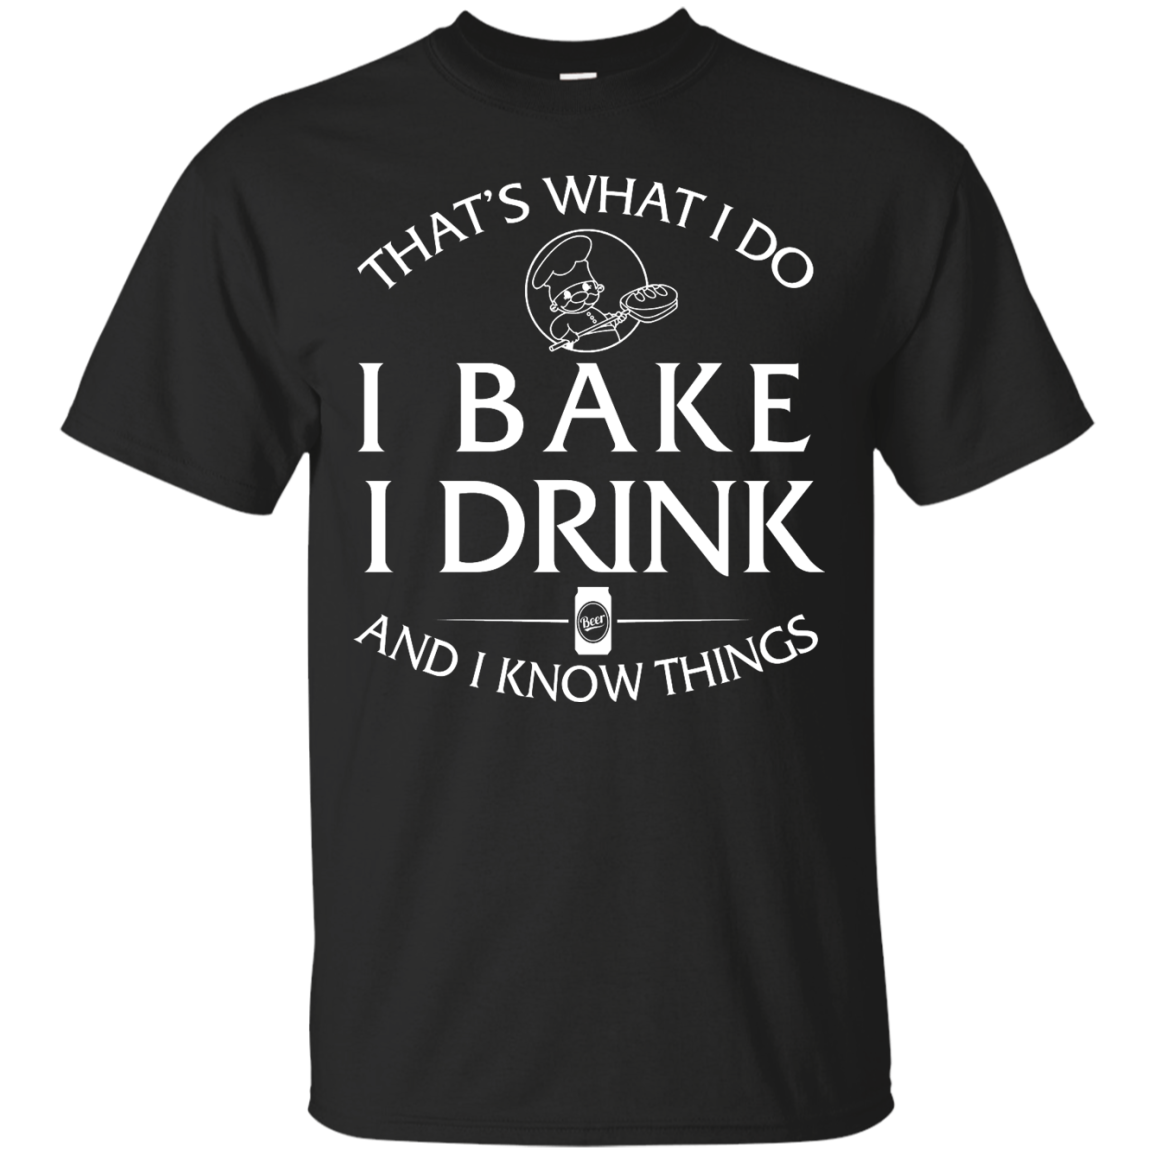 I Bake, I Drink and I know thing shirt, hoodie, tank